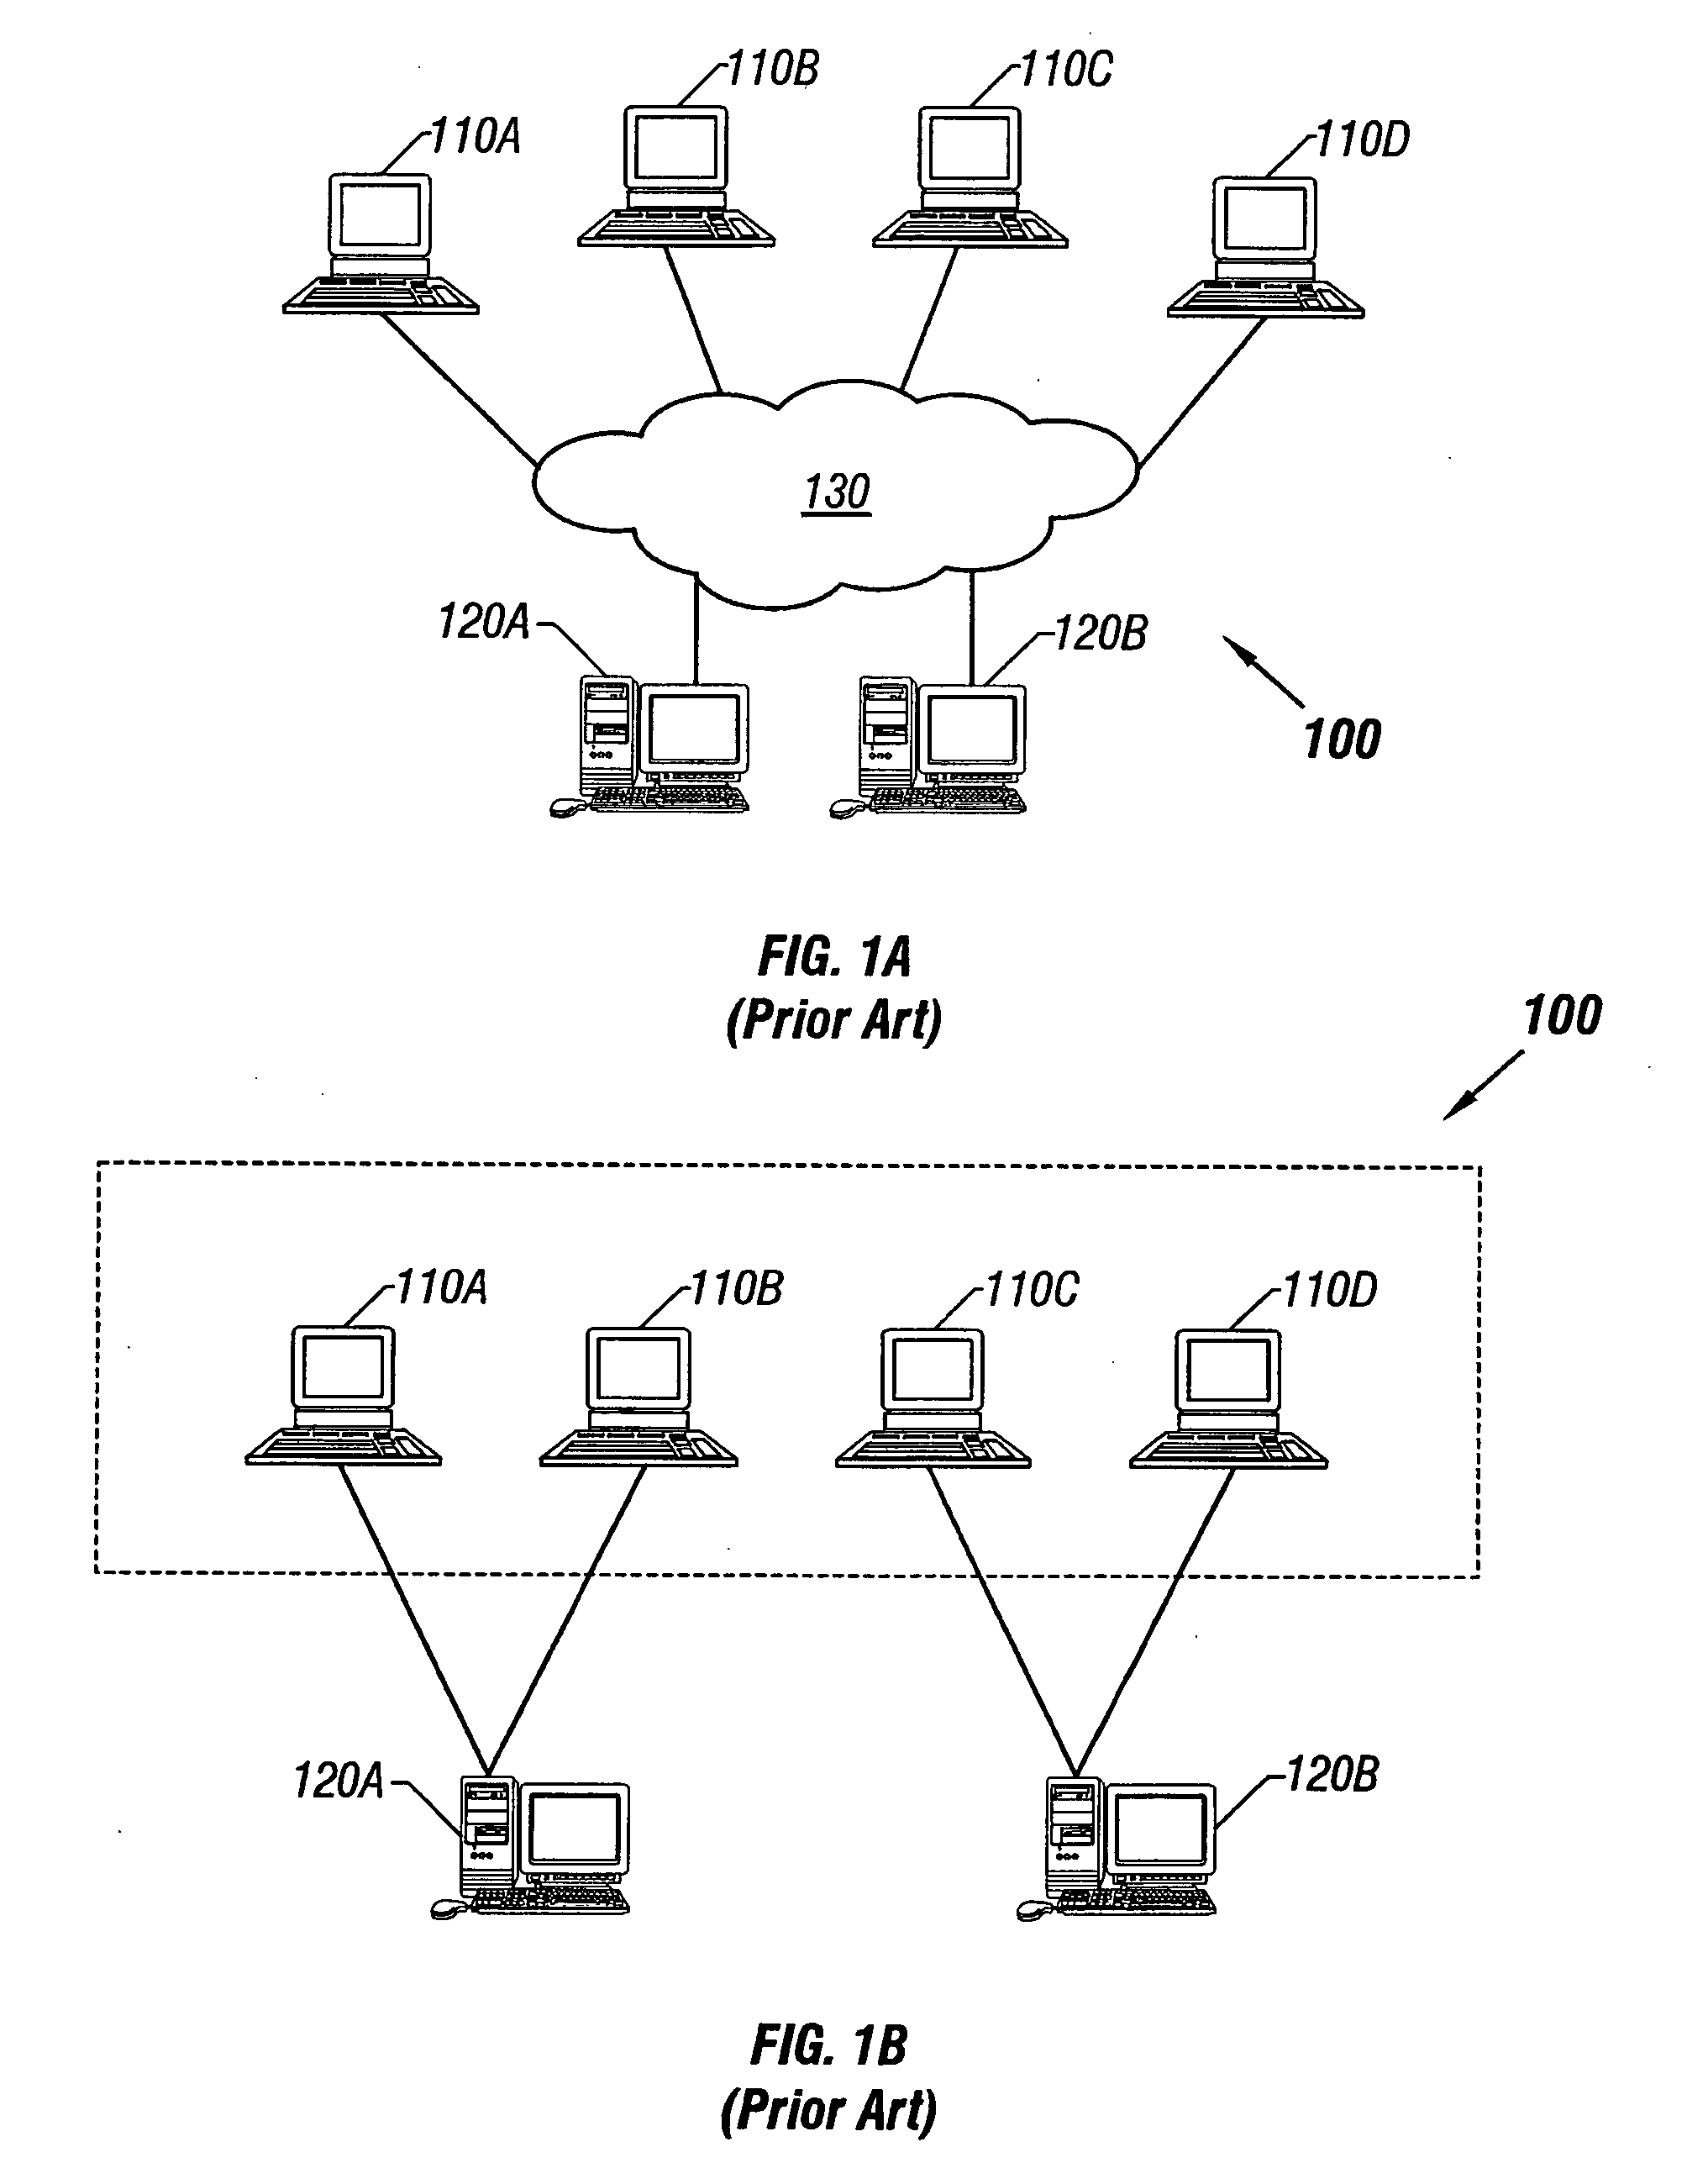 Secure communications system for collaborative computing